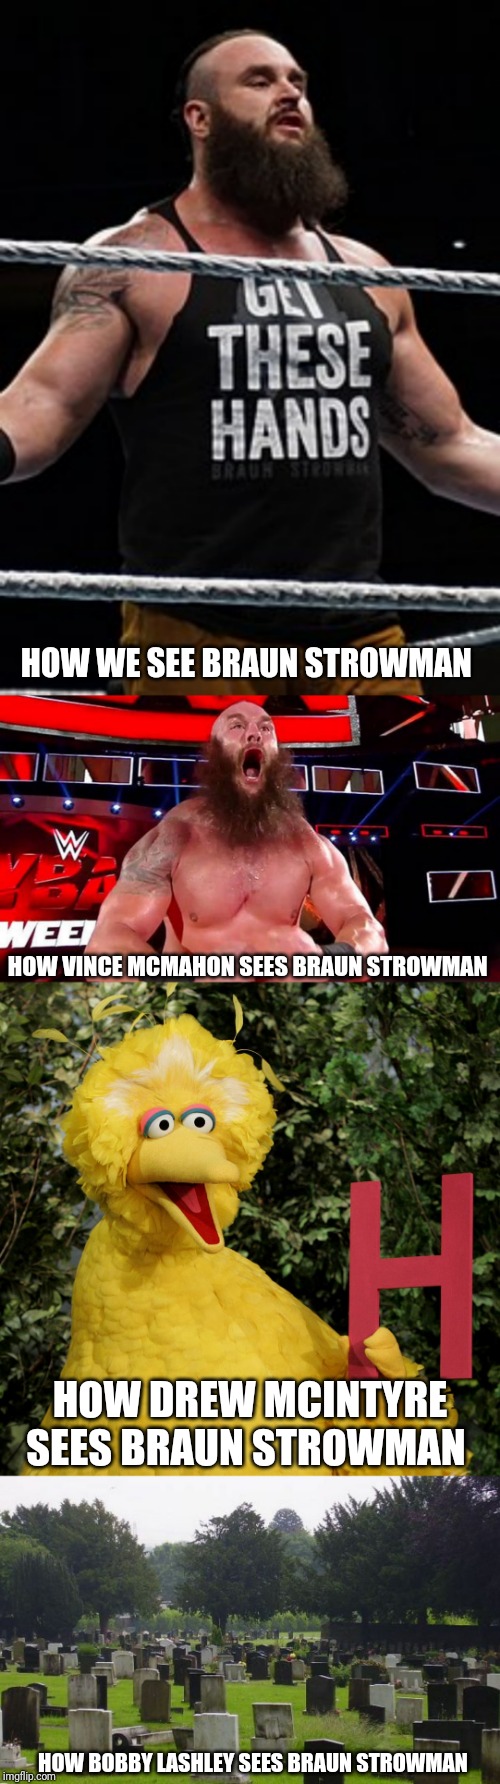 A good WWE Smackdown live 7/2/2019 meme idea | HOW WE SEE BRAUN STROWMAN; HOW VINCE MCMAHON SEES BRAUN STROWMAN; HOW DREW MCINTYRE SEES BRAUN STROWMAN; HOW BOBBY LASHLEY SEES BRAUN STROWMAN | image tagged in memes,wwe,braun strowman,drew mcintyre,bobby lashley,funny | made w/ Imgflip meme maker